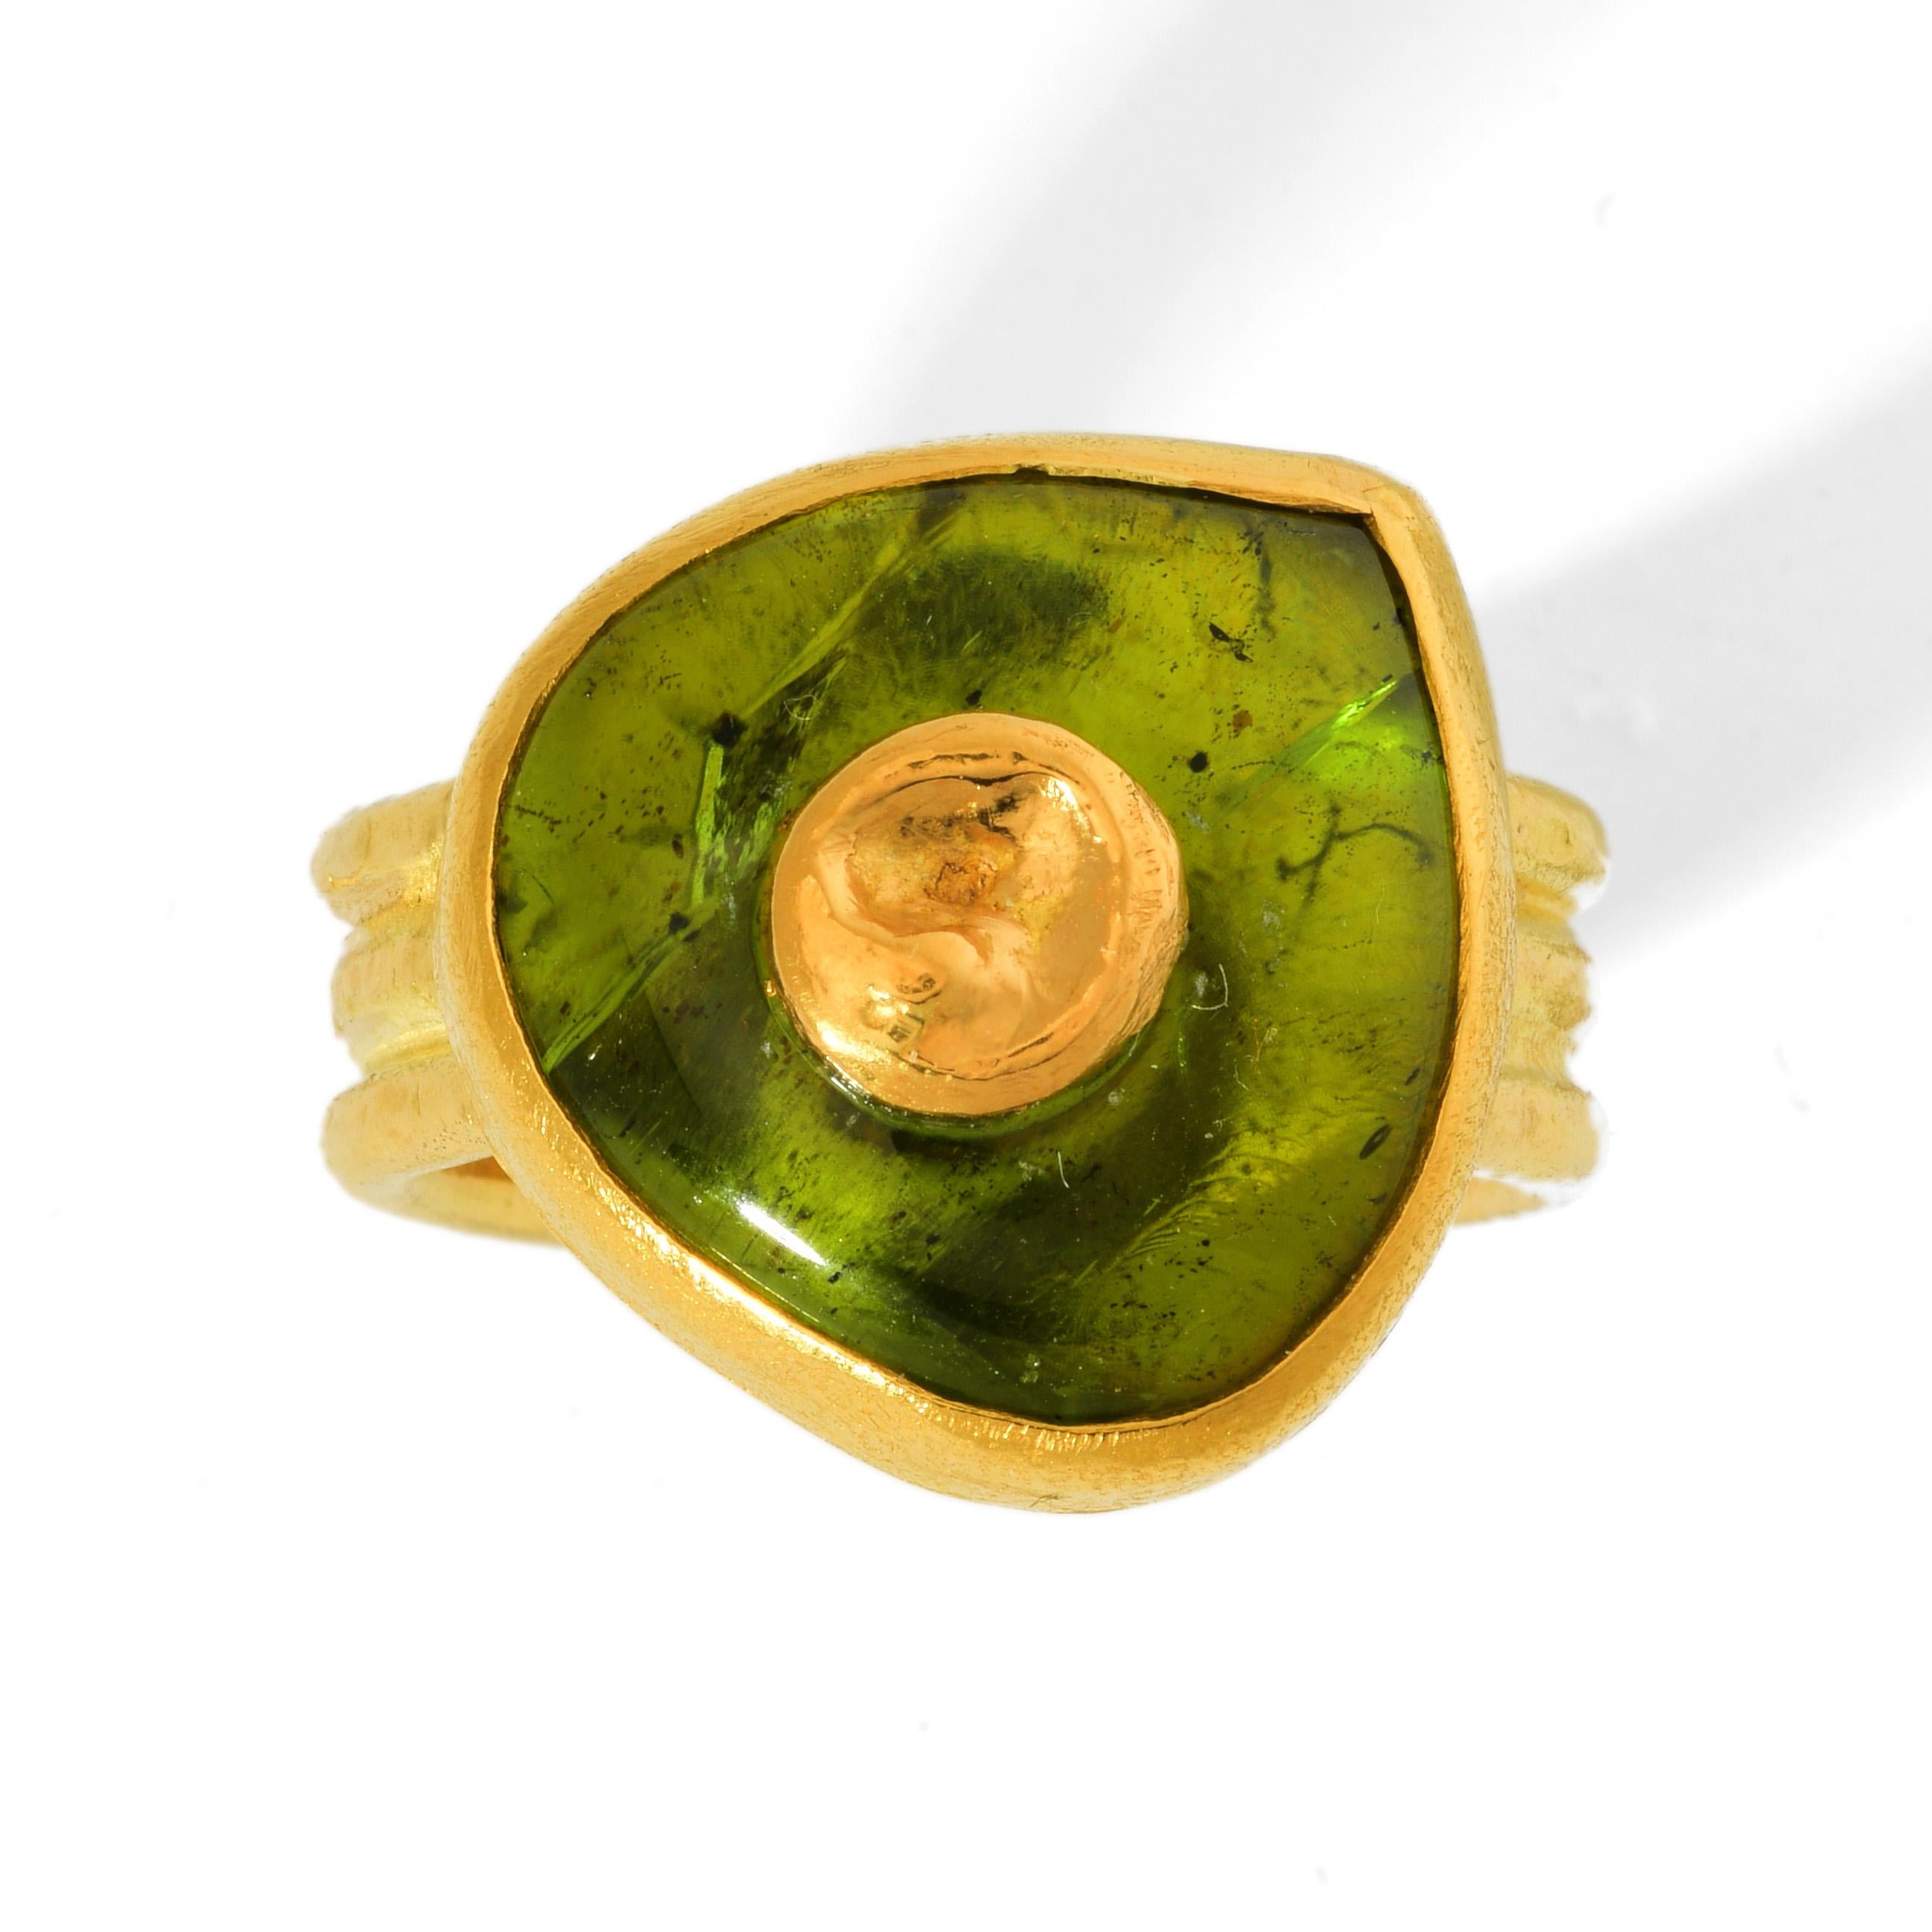 Bold Charmian Harris ring in ample 22 and 18 karat yellow gold with an unusually cut vivid green peridot. Handmade with an organic softness that makes it easy to wear.

U.S size: 7
U.K size: N½

Stone size:
Height: 2cm
Width: 1.8cm
Depth: